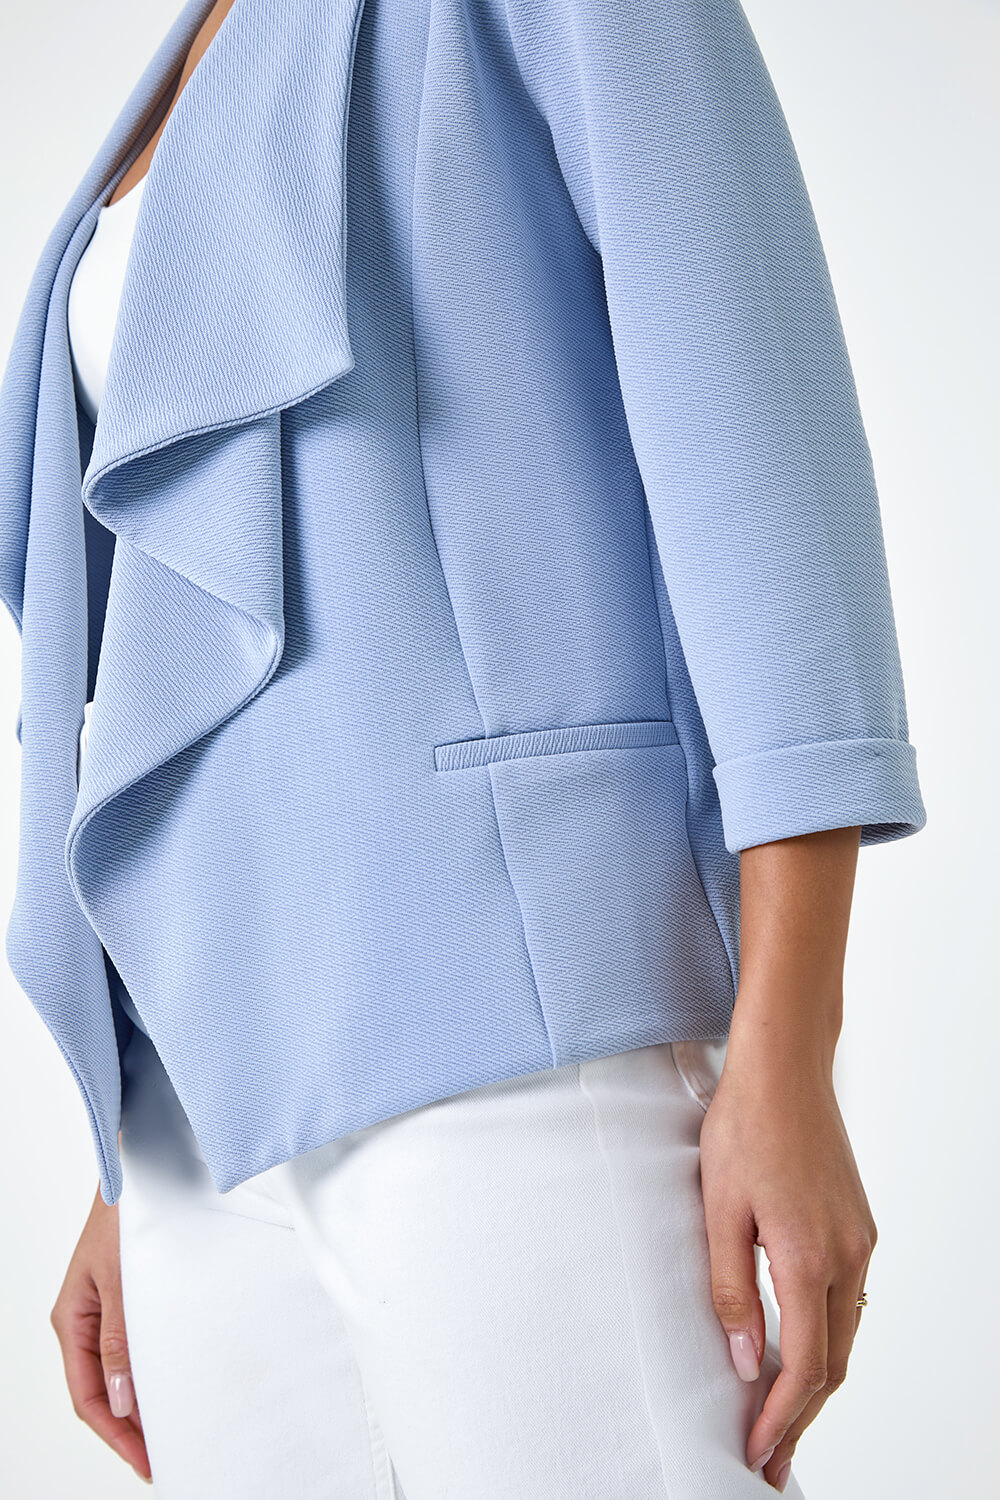 Light Blue  Textured Stretch Waterfall Front Jacket, Image 5 of 6